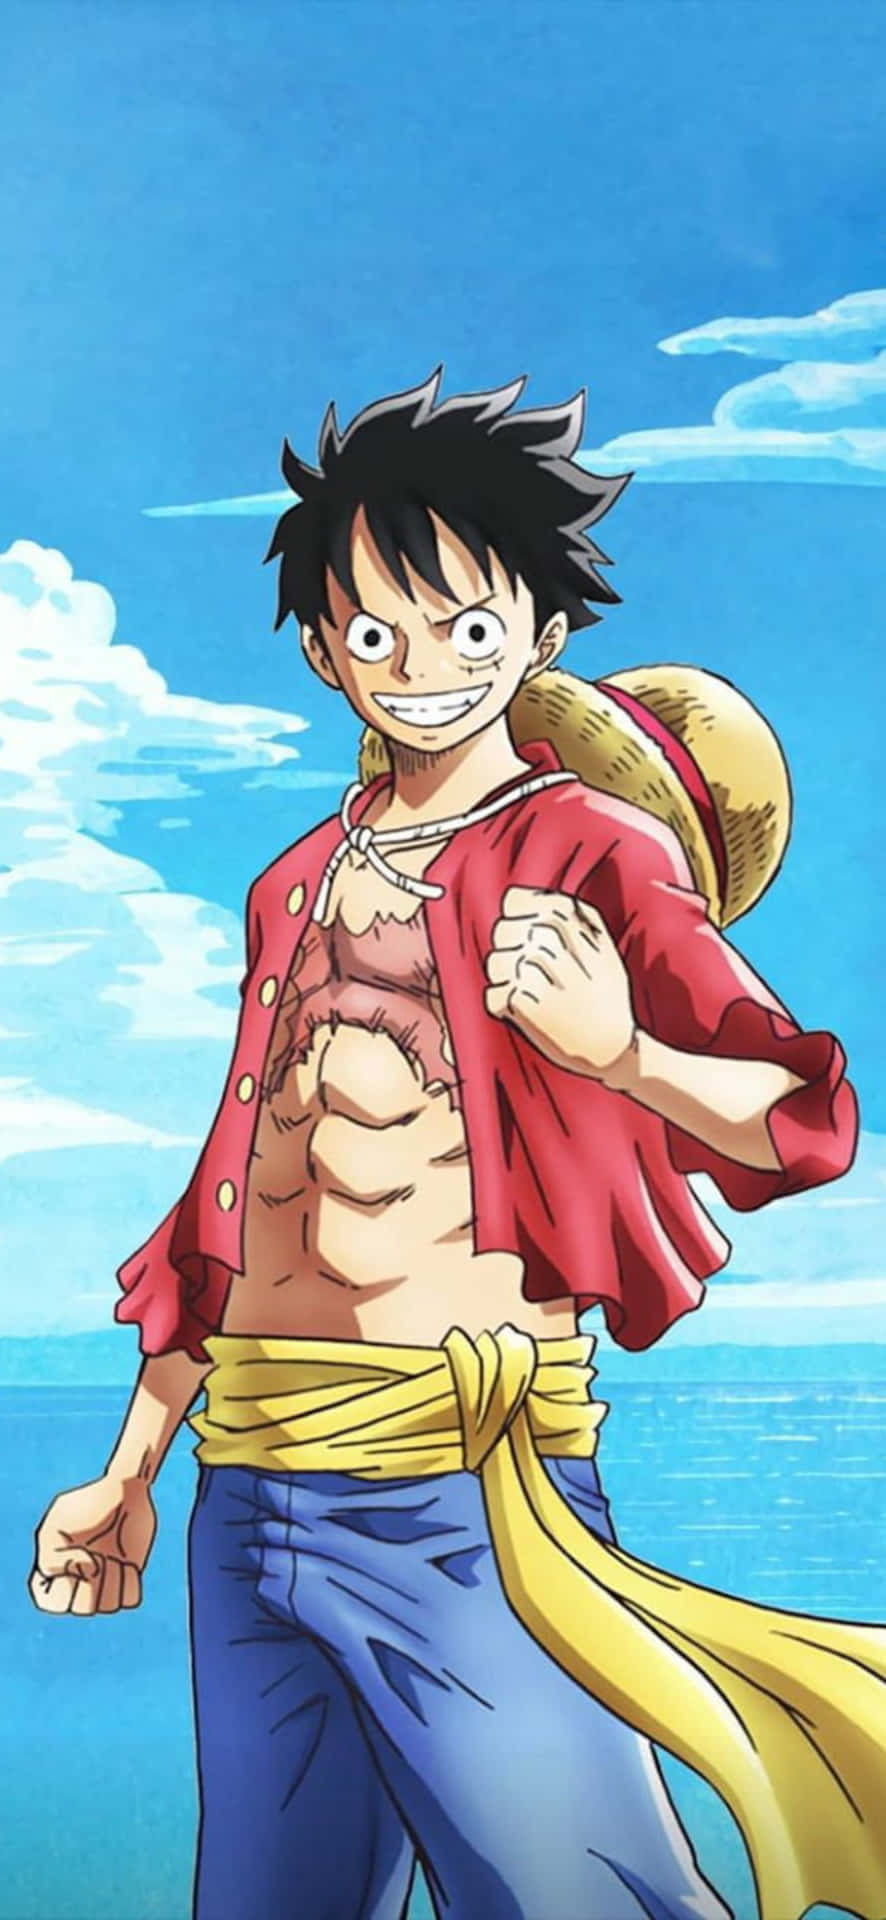 Join the Pirate Gang with Luffy and the One Piece Iphone Wallpaper